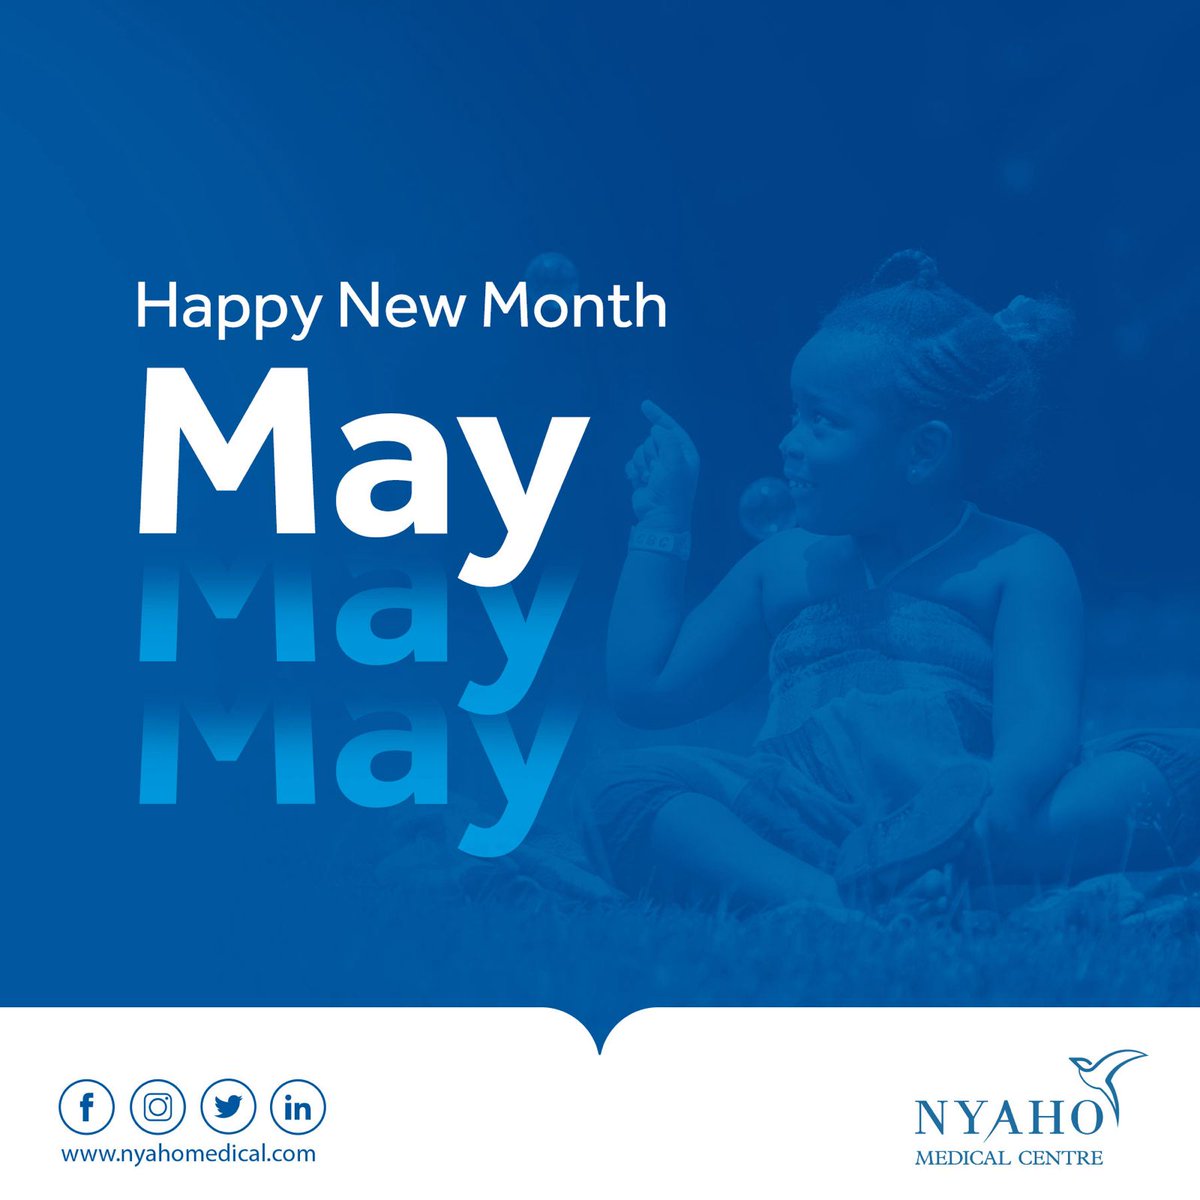 Happy New Month! May is Mental Health Awareness Month. This month, we're raising awareness to improve knowledge and drive actions that promote and protect everyone's mental health. Follow us for educational tips and advice on protecting your mental health. #NewMonth #Nyaho